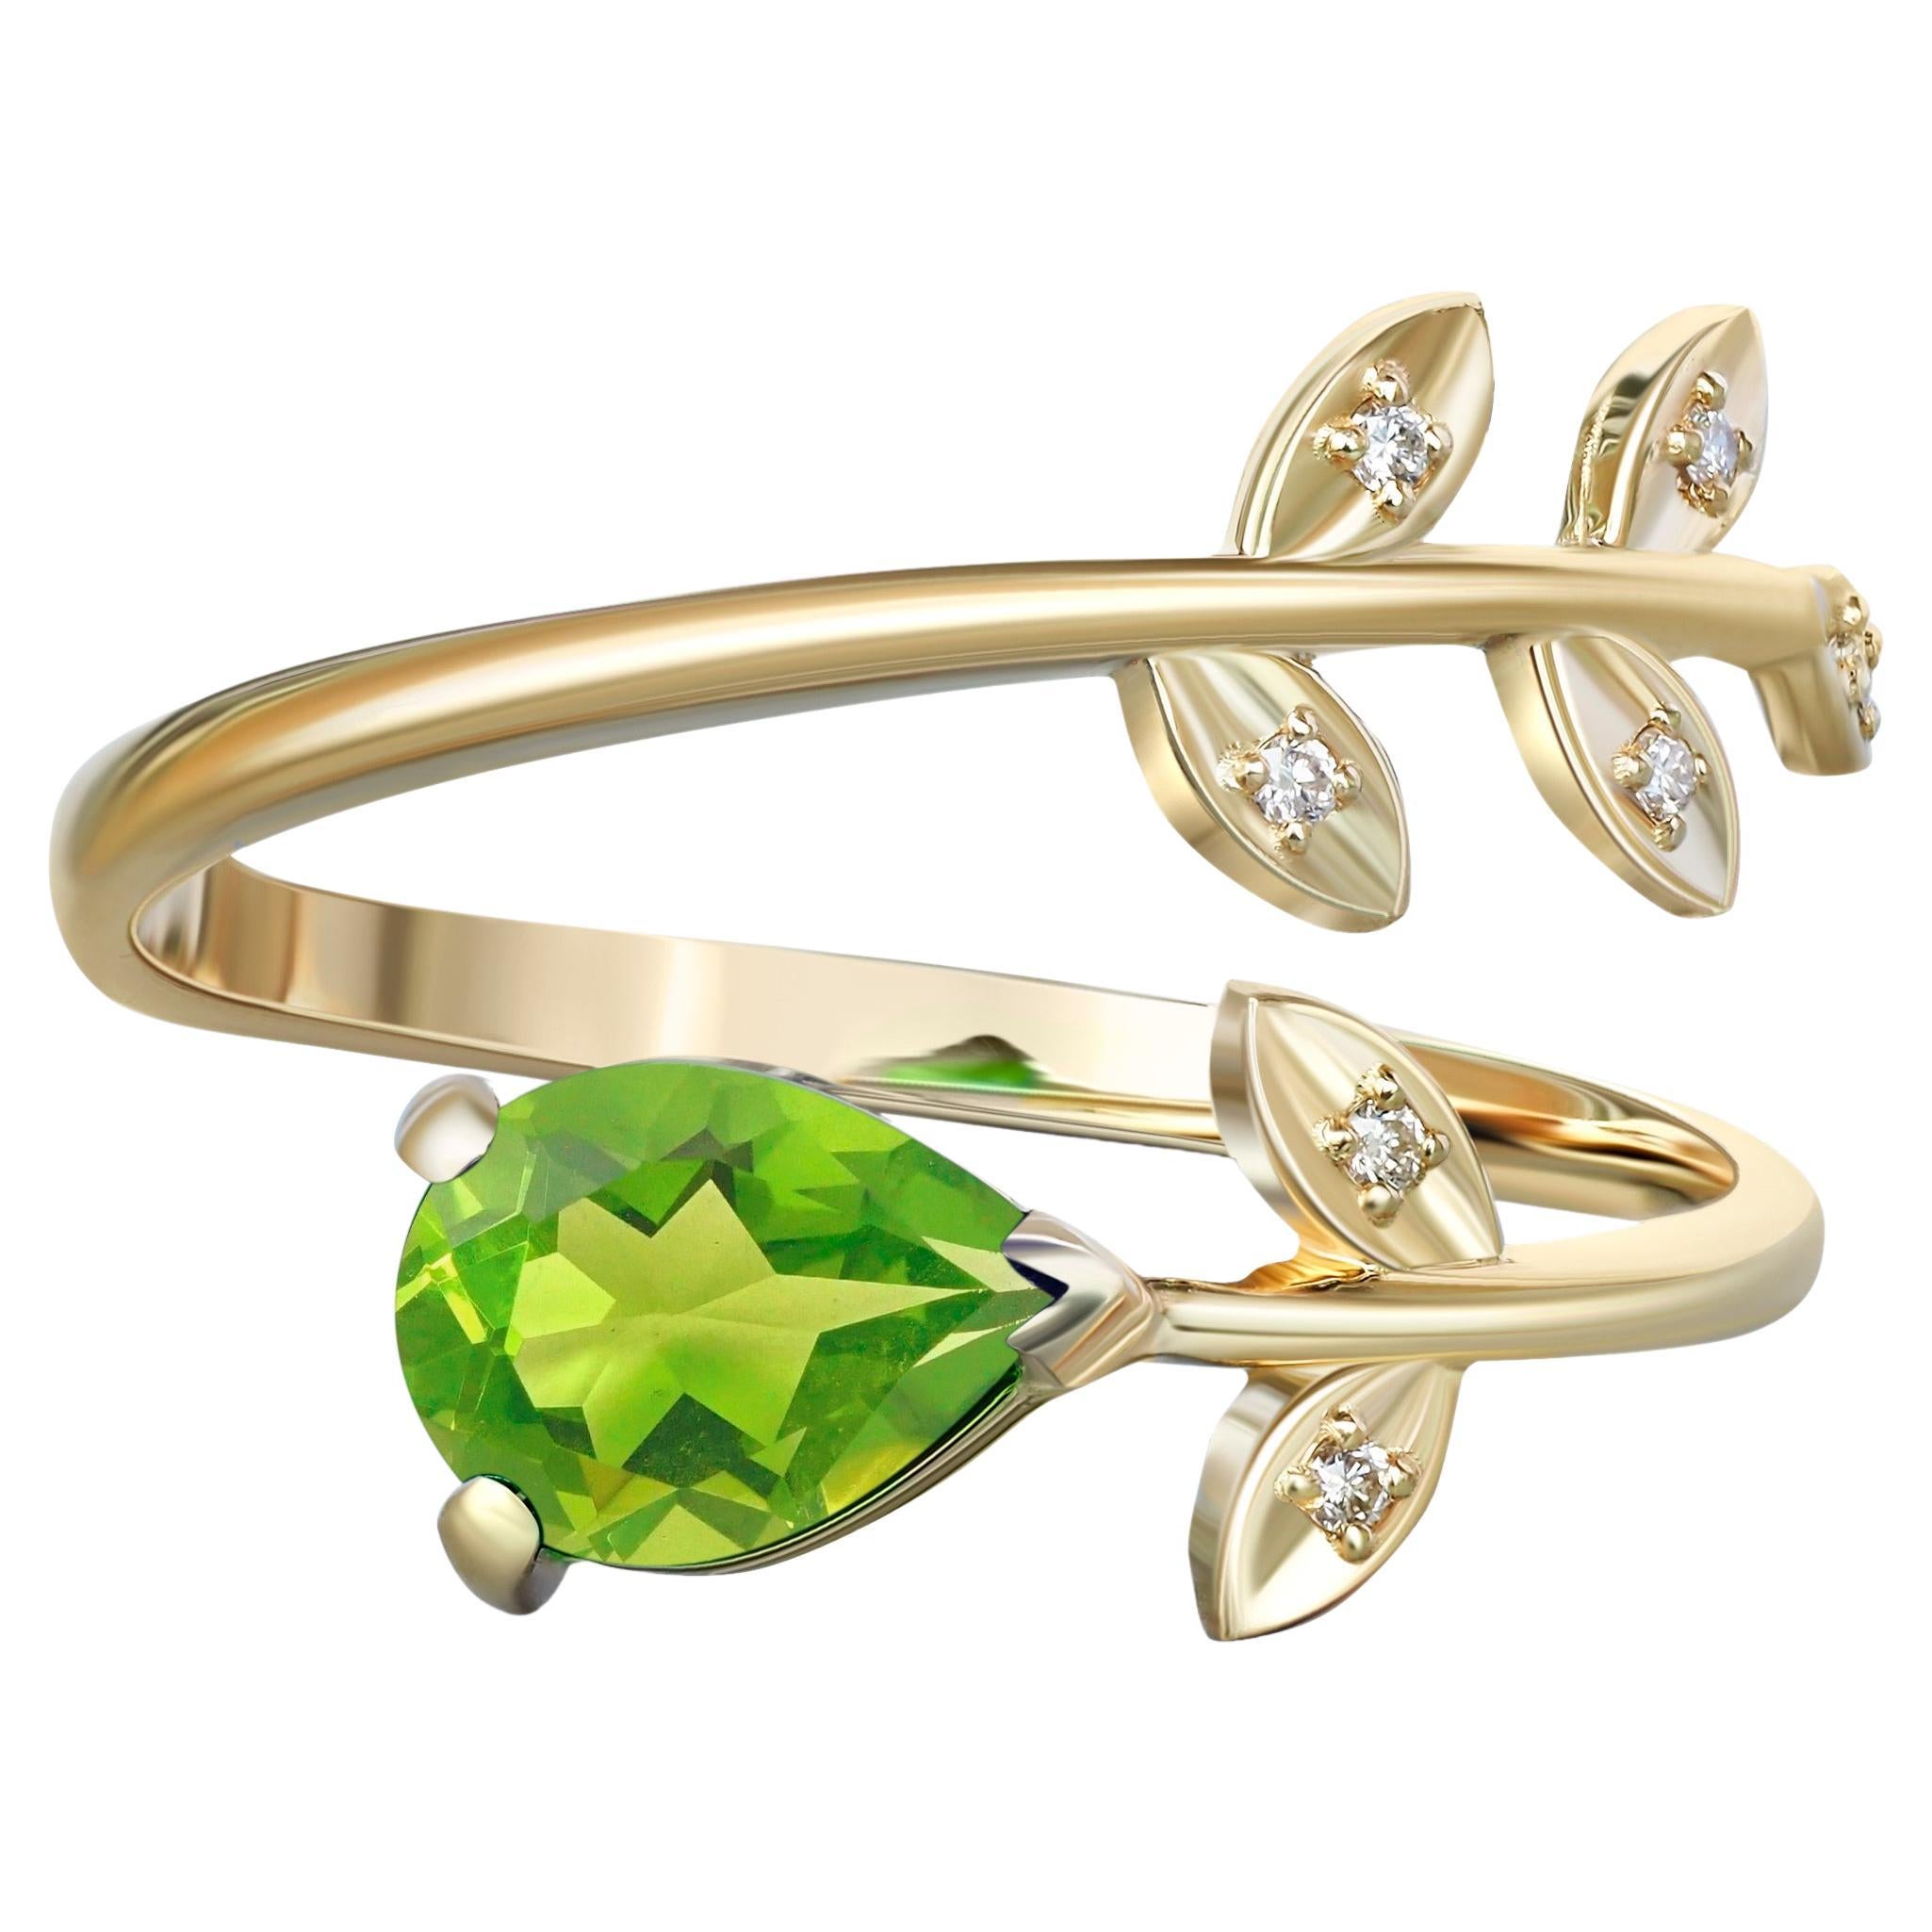 August birthstone peridot 14k gold ring. For Sale